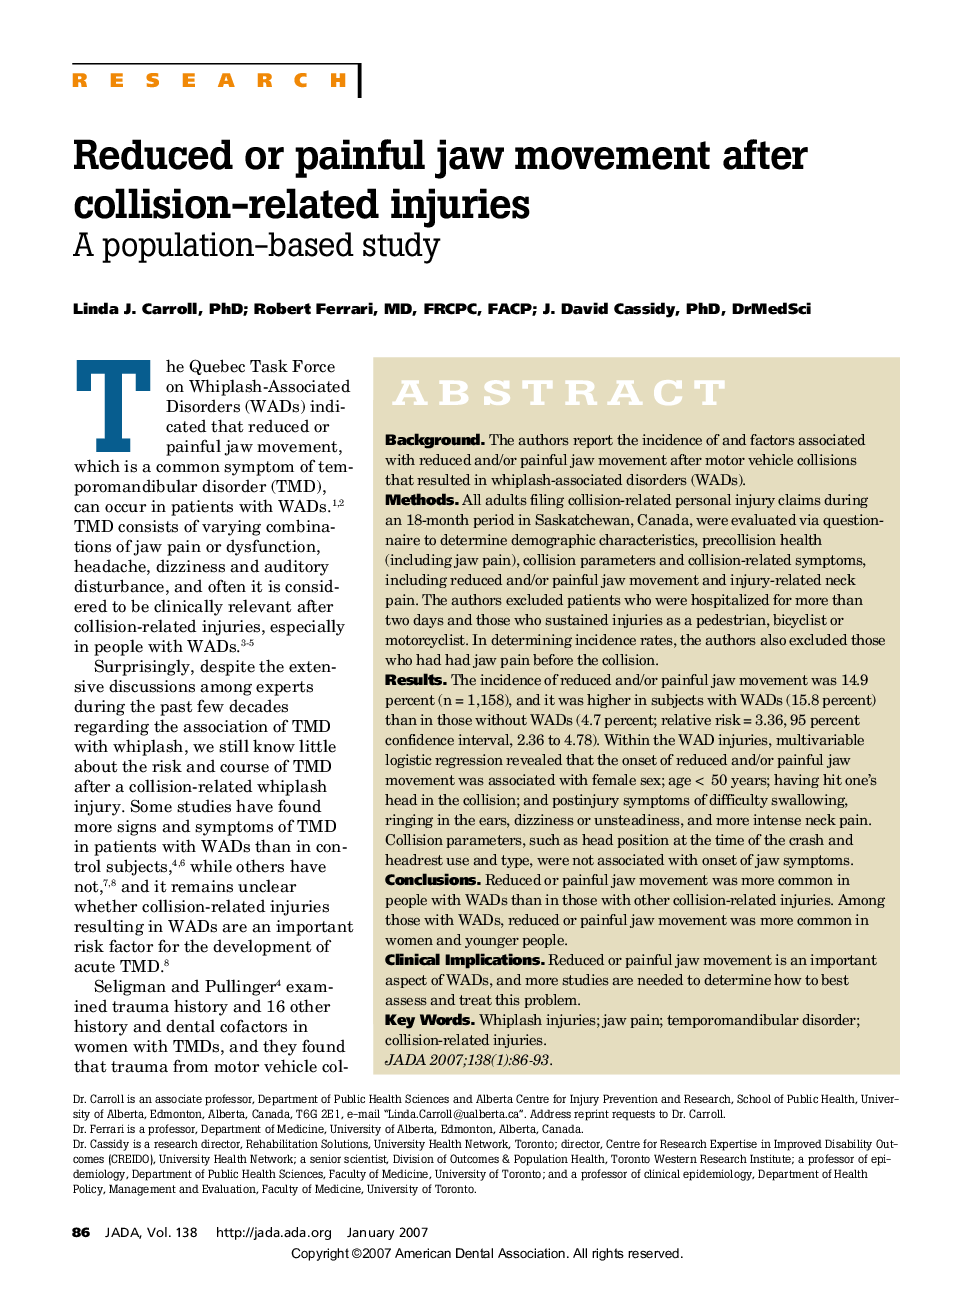 Reduced or painful jaw movement after collision-related injuries: A population-based study